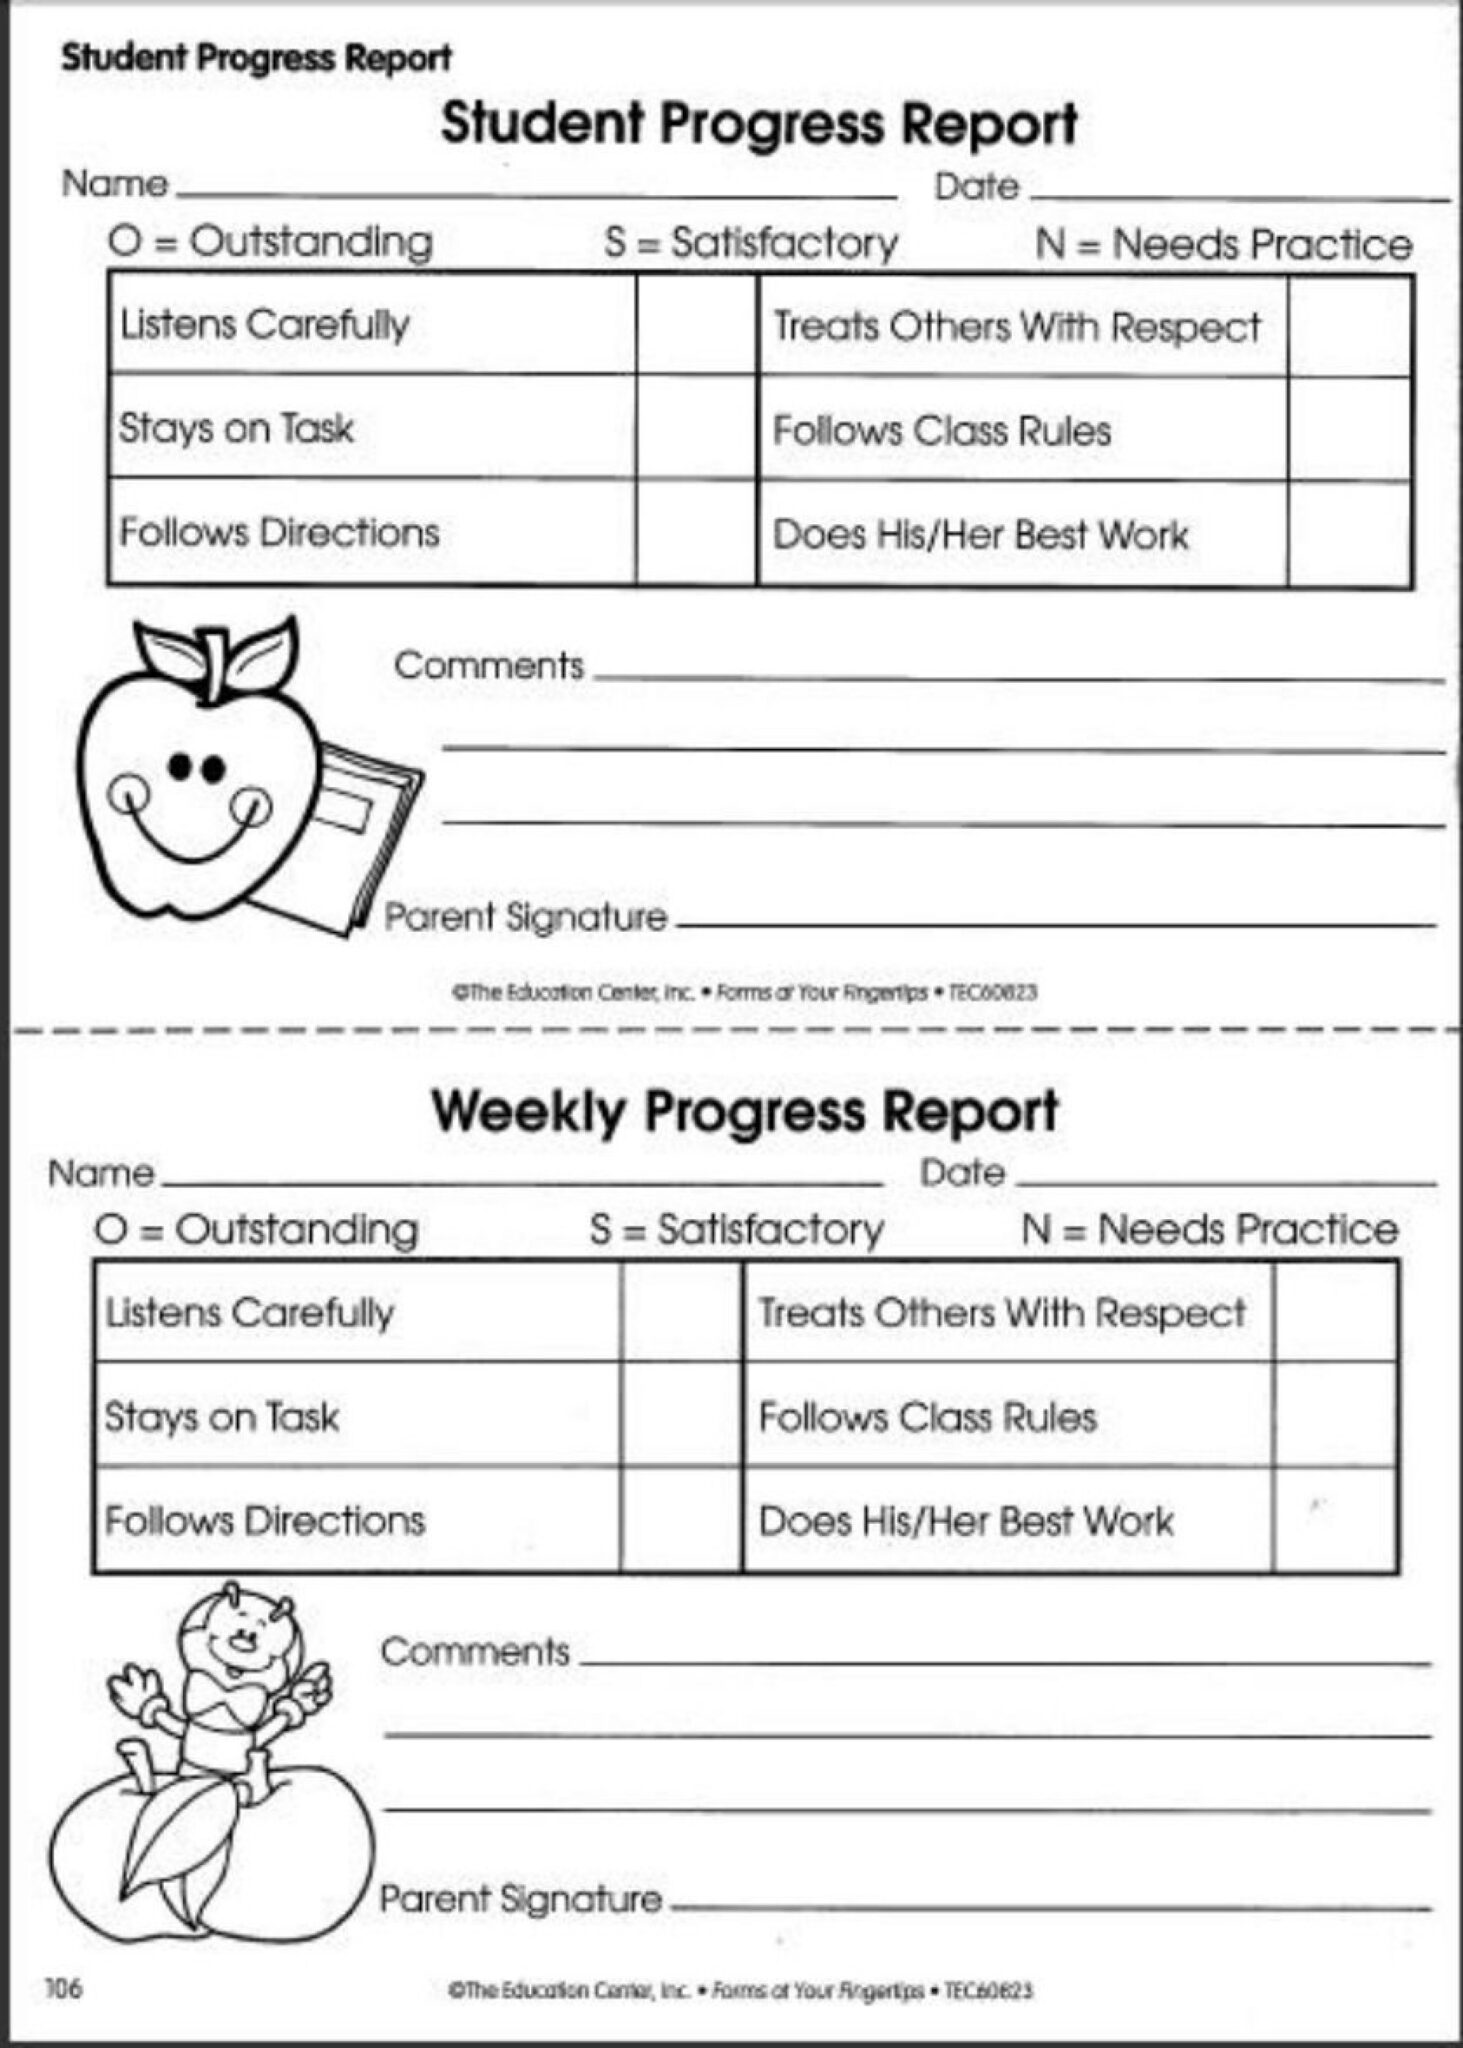 008 Student Progress Report Template Ideas Daily For With Educational